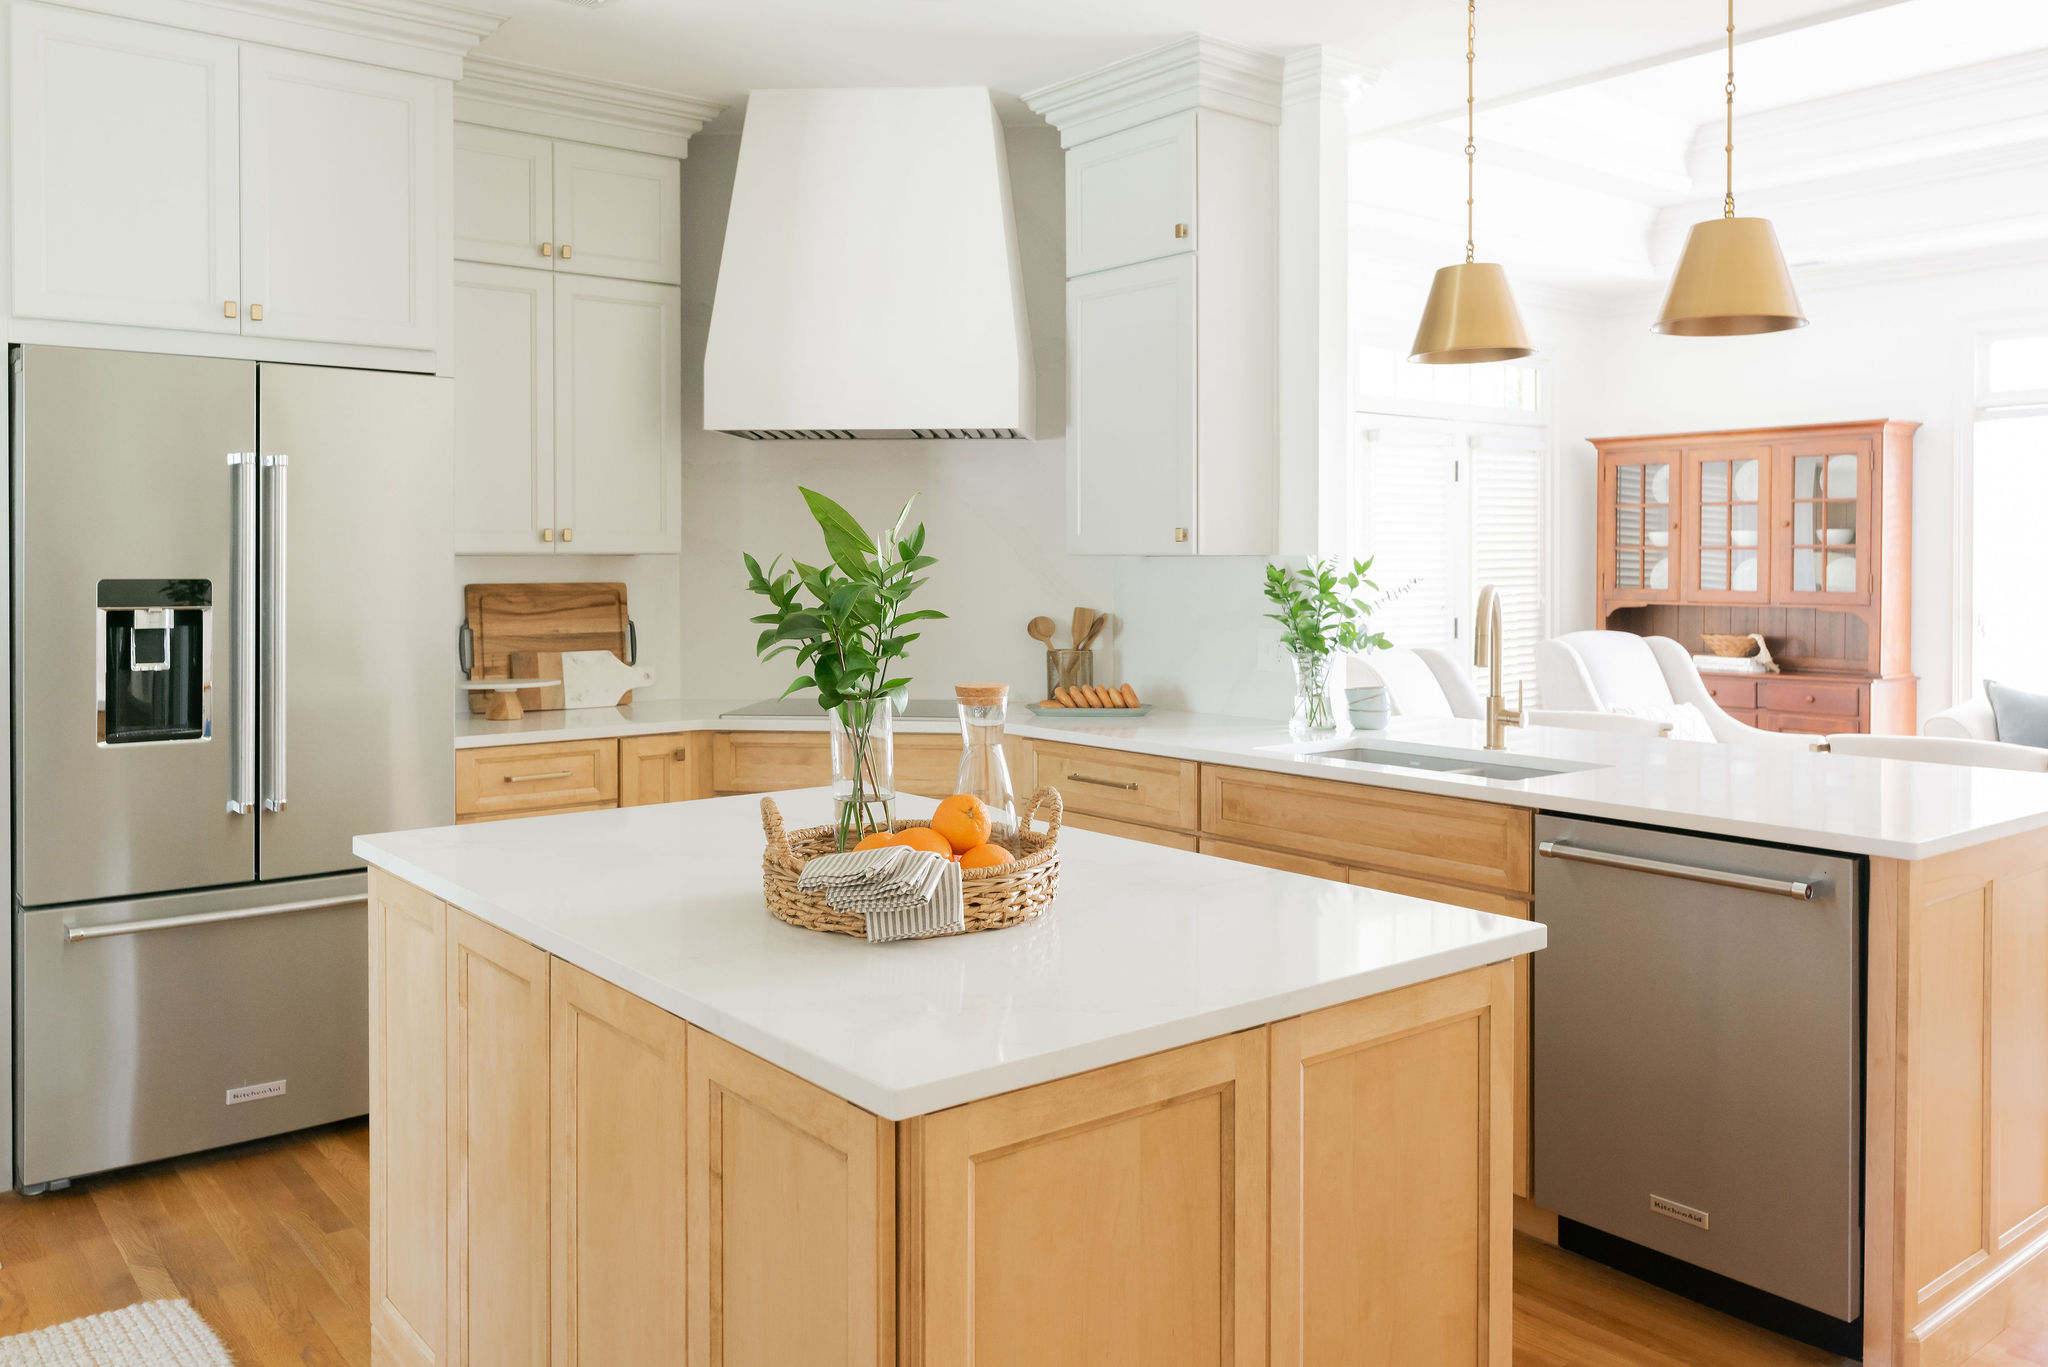 Replacing Your Kitchen Cabinets? Check Out These 6 Amazing Color Trends